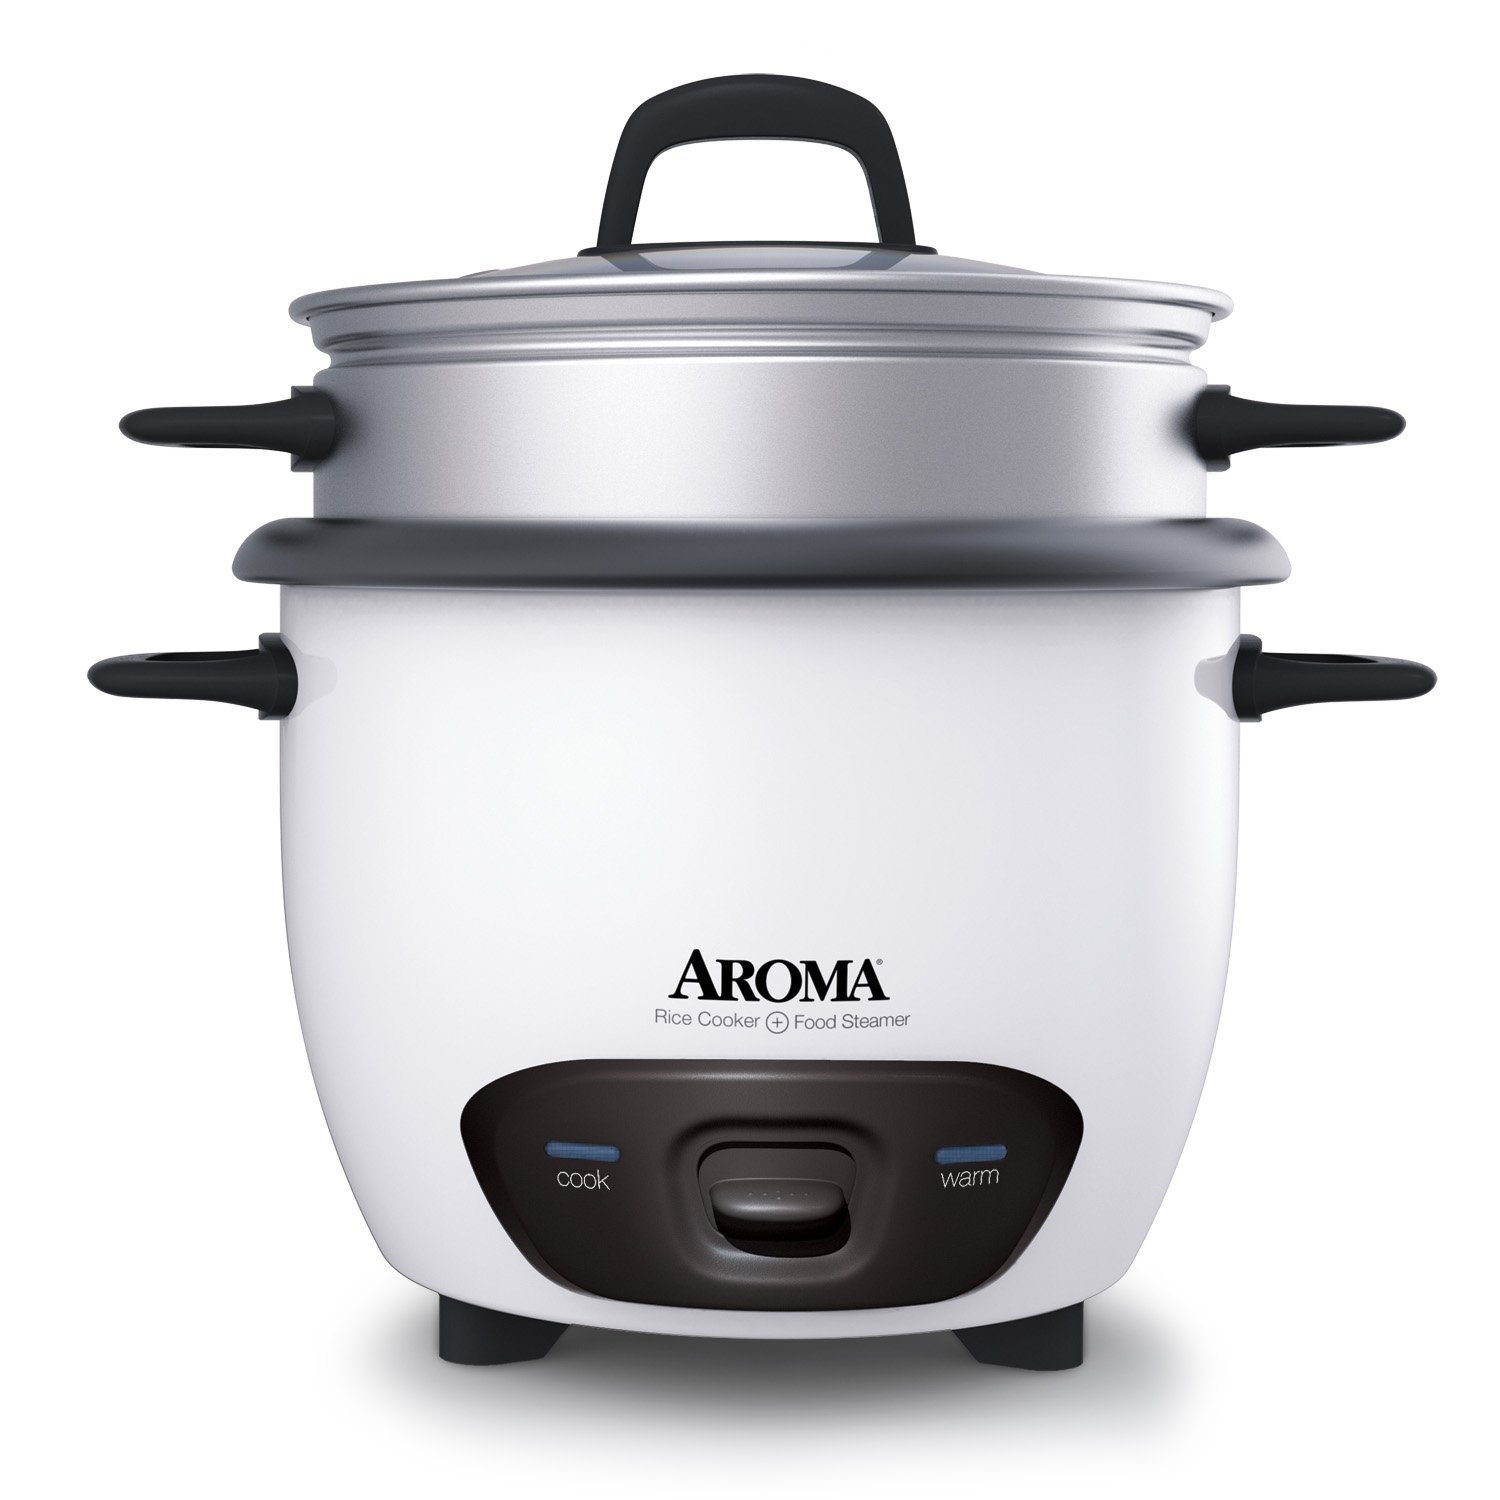 Aroma 6-Cup Rice Cooker & Food Steamer Review | Best Food Steamer Brands